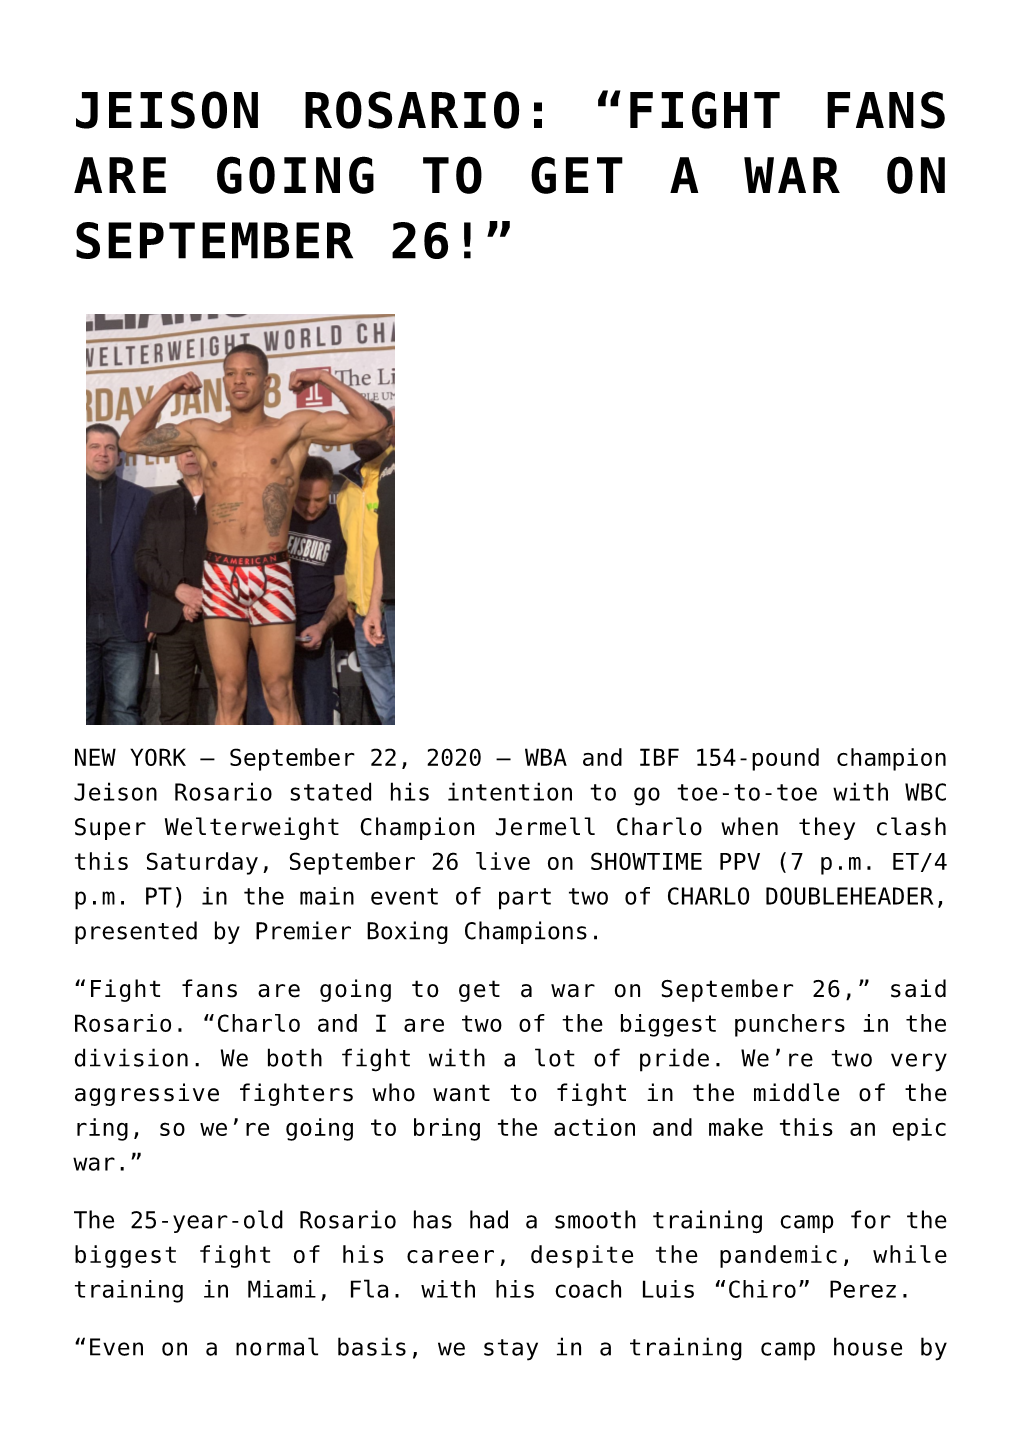 Jeison Rosario: “Fight Fans Are Going to Get a War on September 26!”